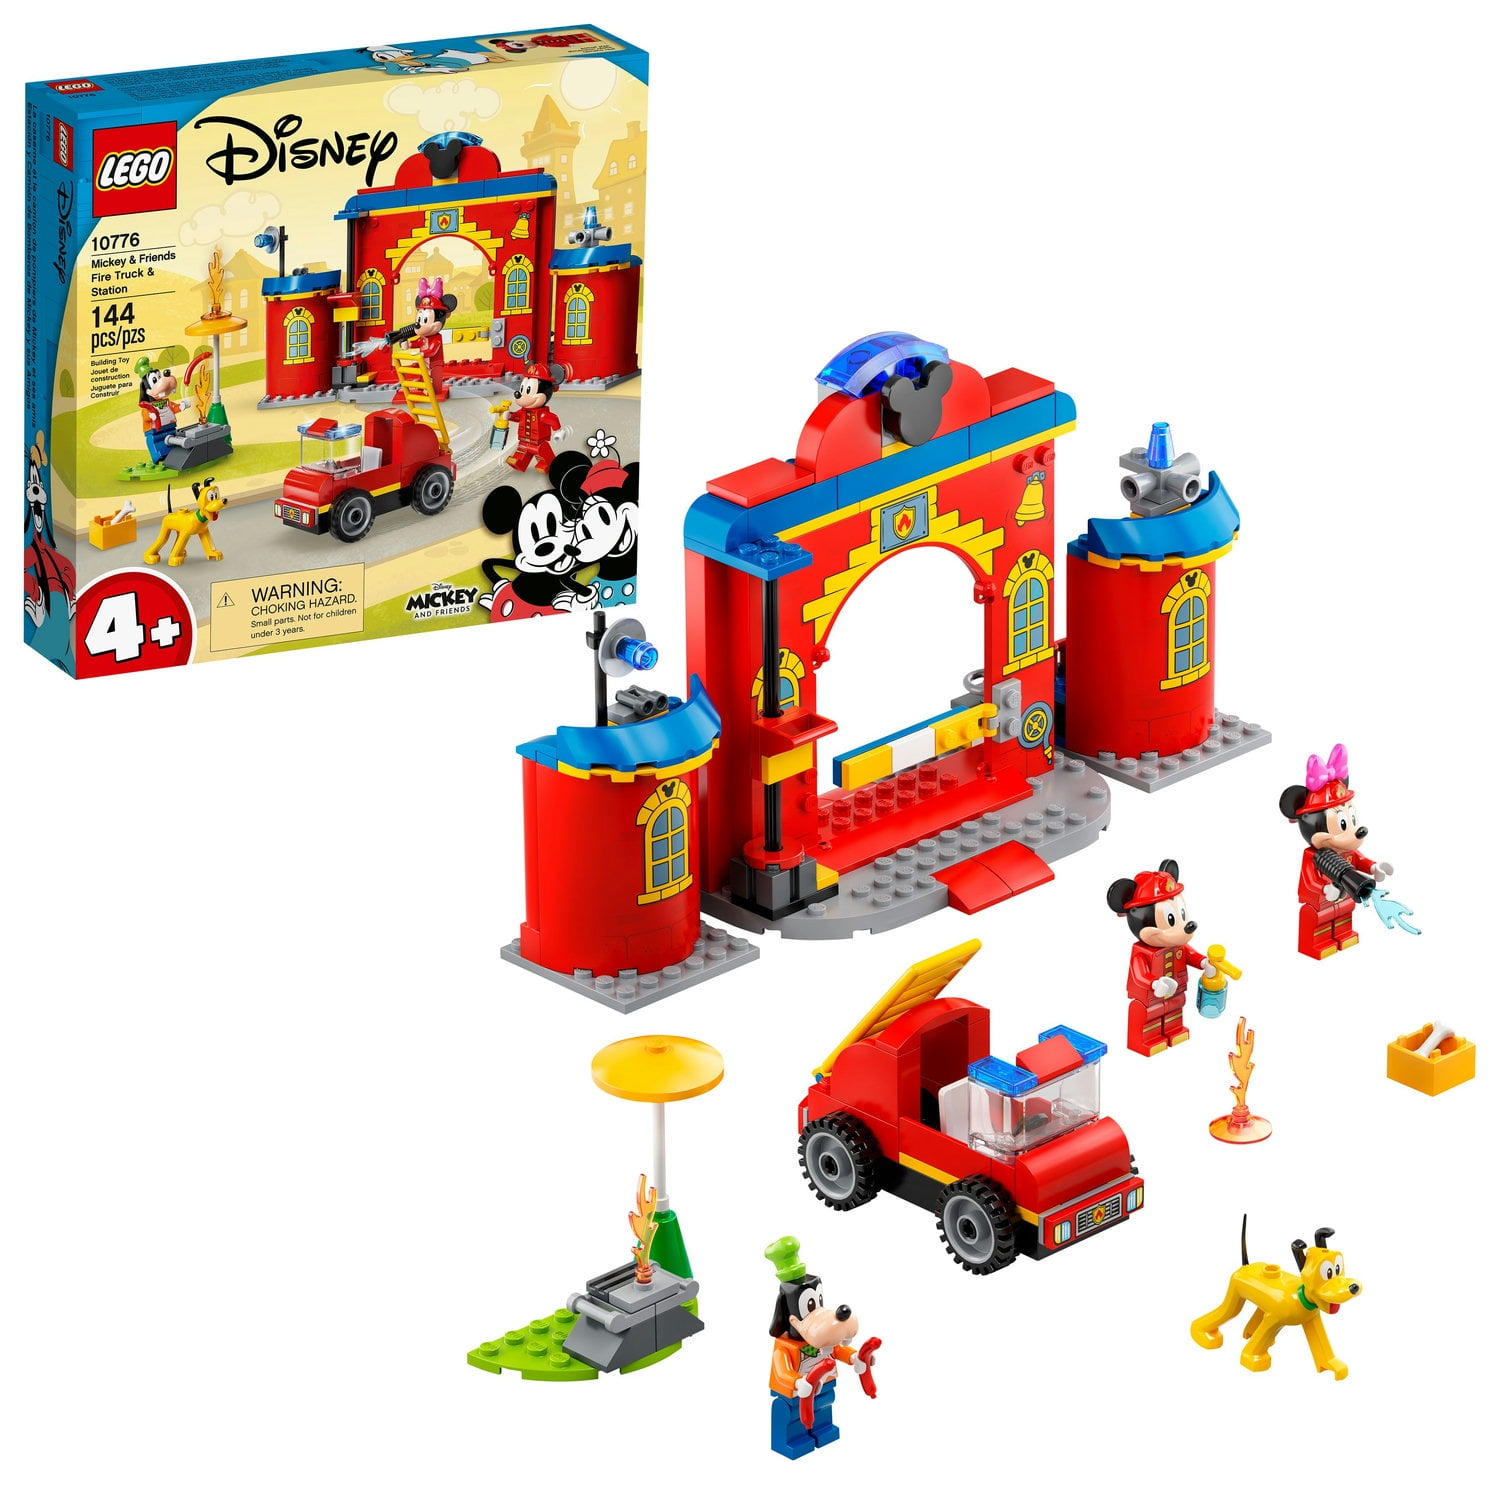 Mickey vehicles means buildings Gadget Disney Special Editions parts